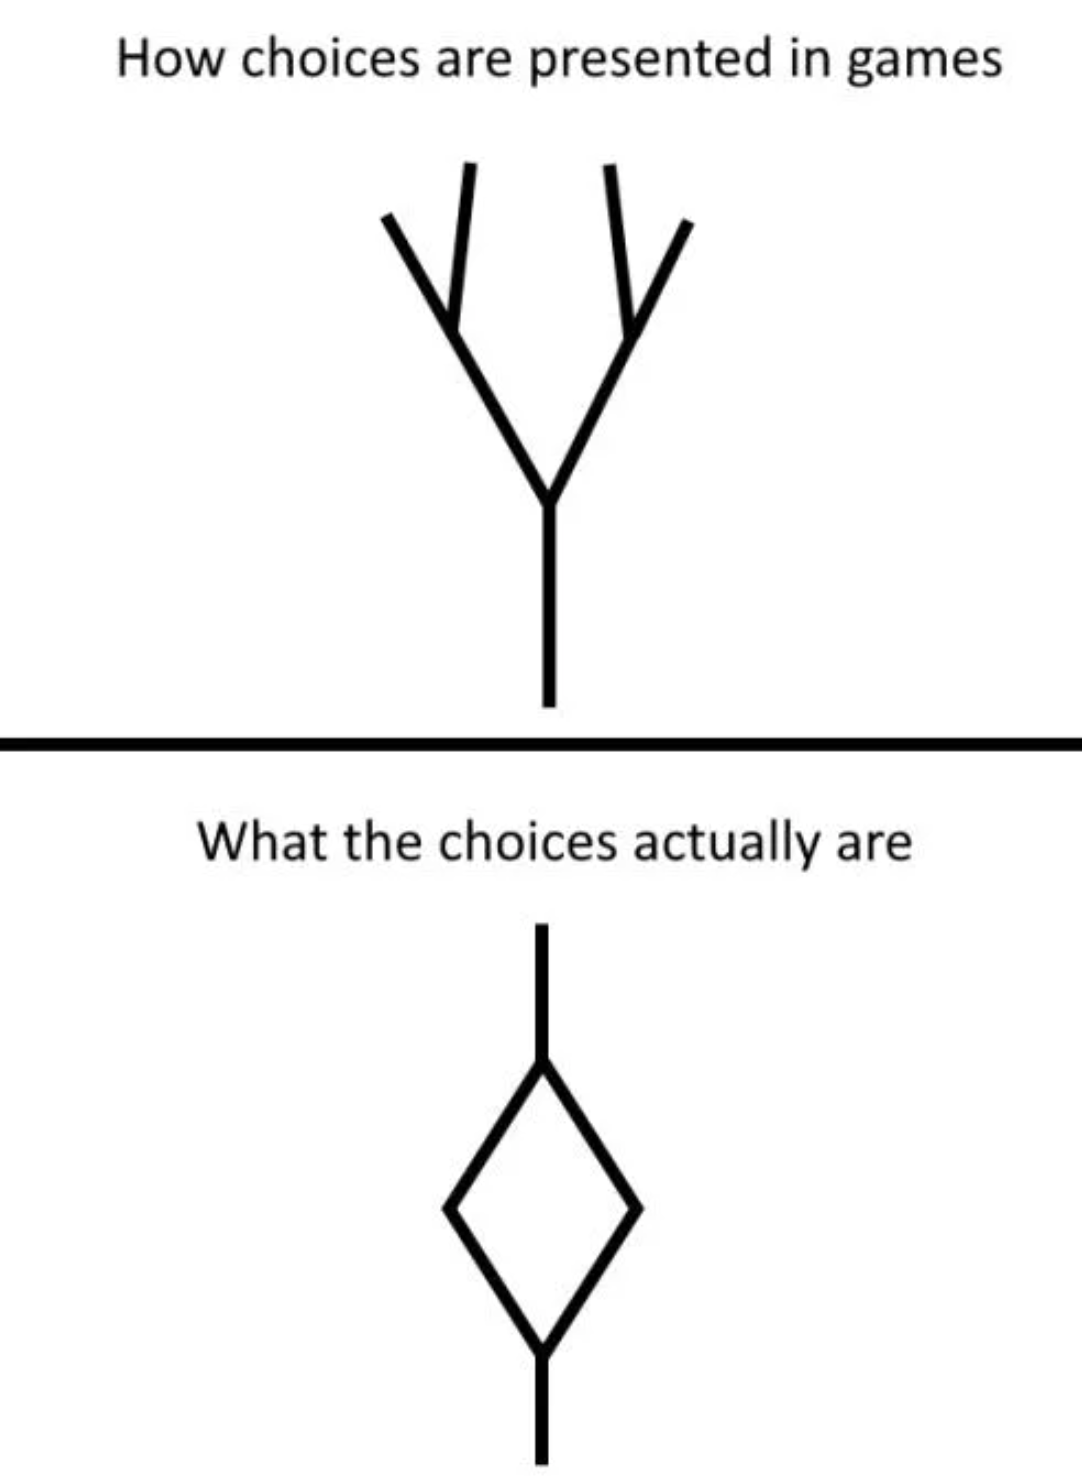 gaming memes and pics - diagram - How choices are presented in games Y What the choices actually are